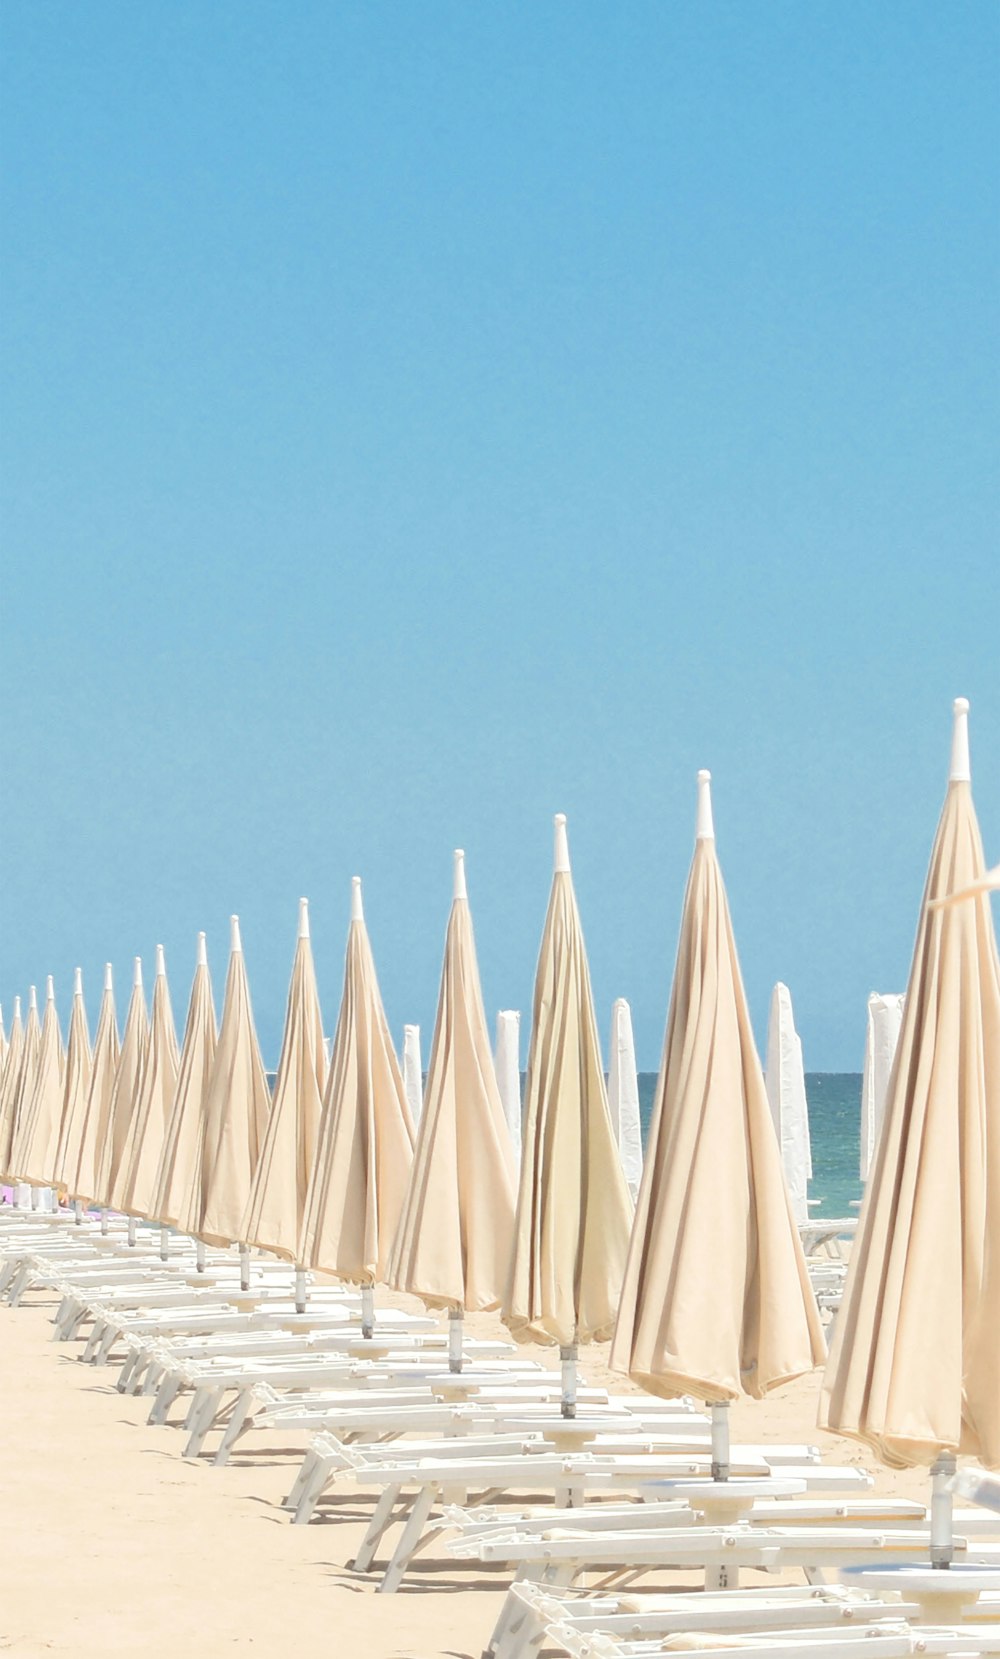 white and blue umbrellas on beach during daytime